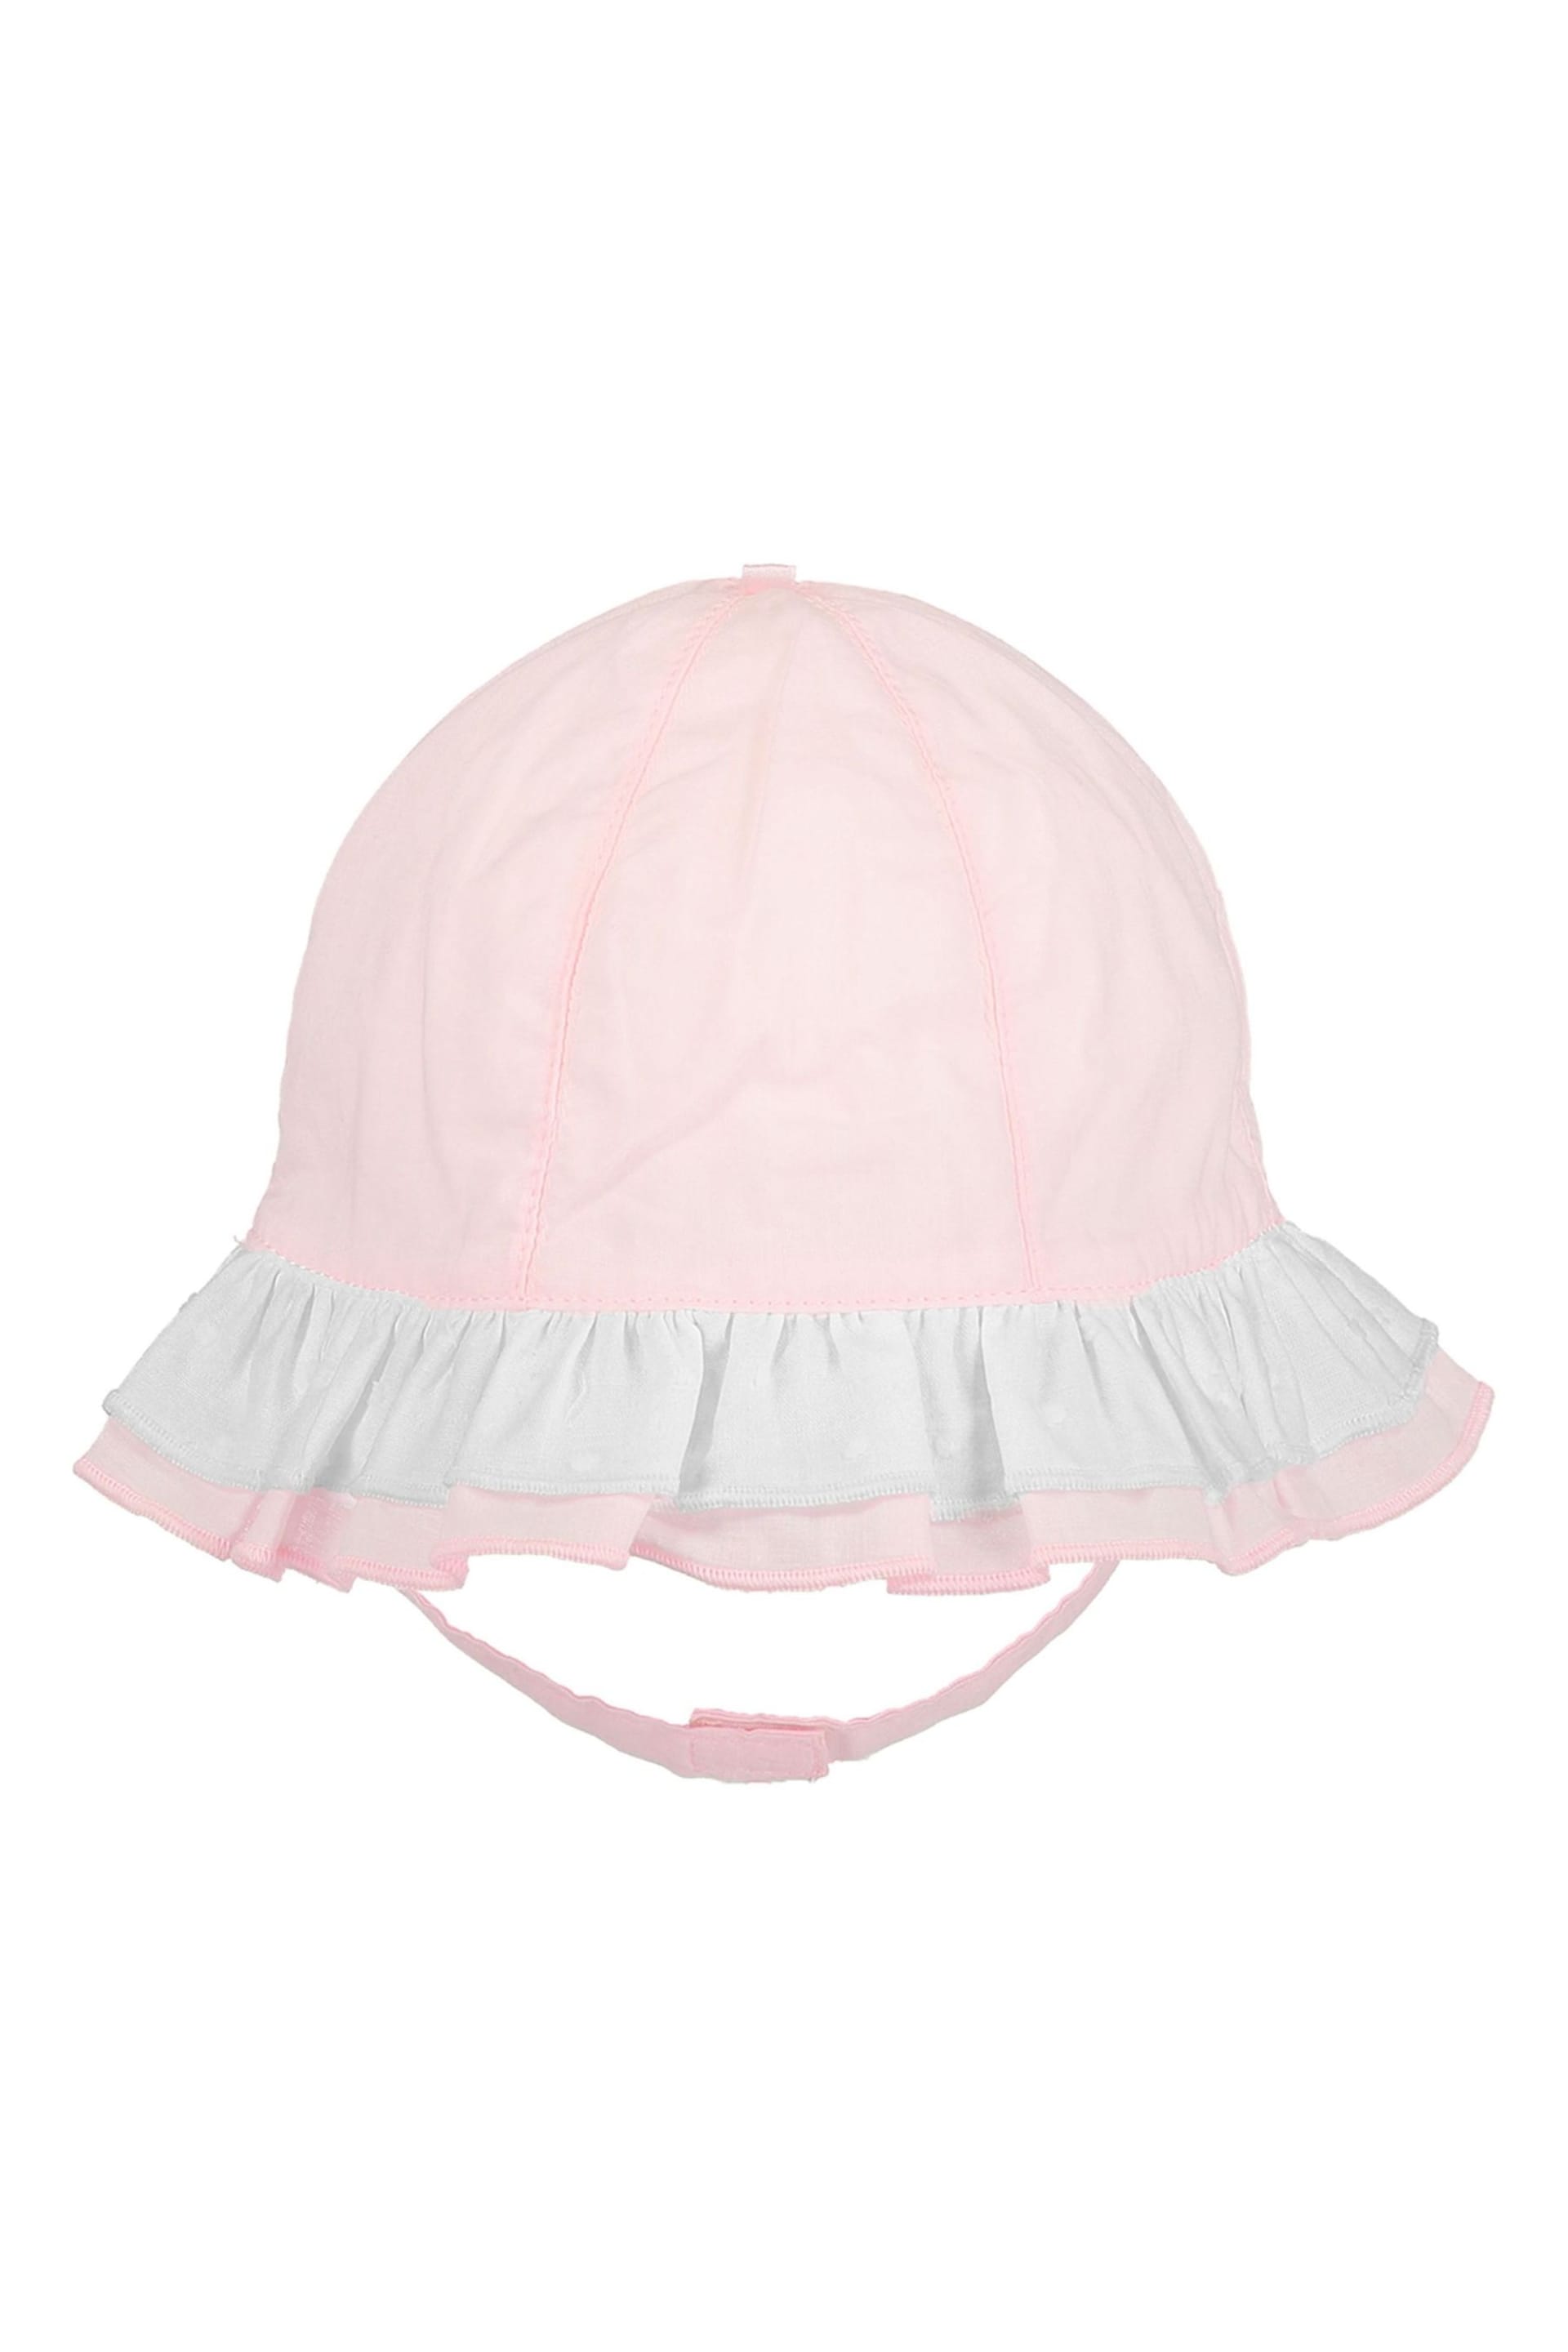 Emile Et Rose Pink Lawn Sunhat Hat With Frilled Brim and Chin Strap - Image 3 of 3